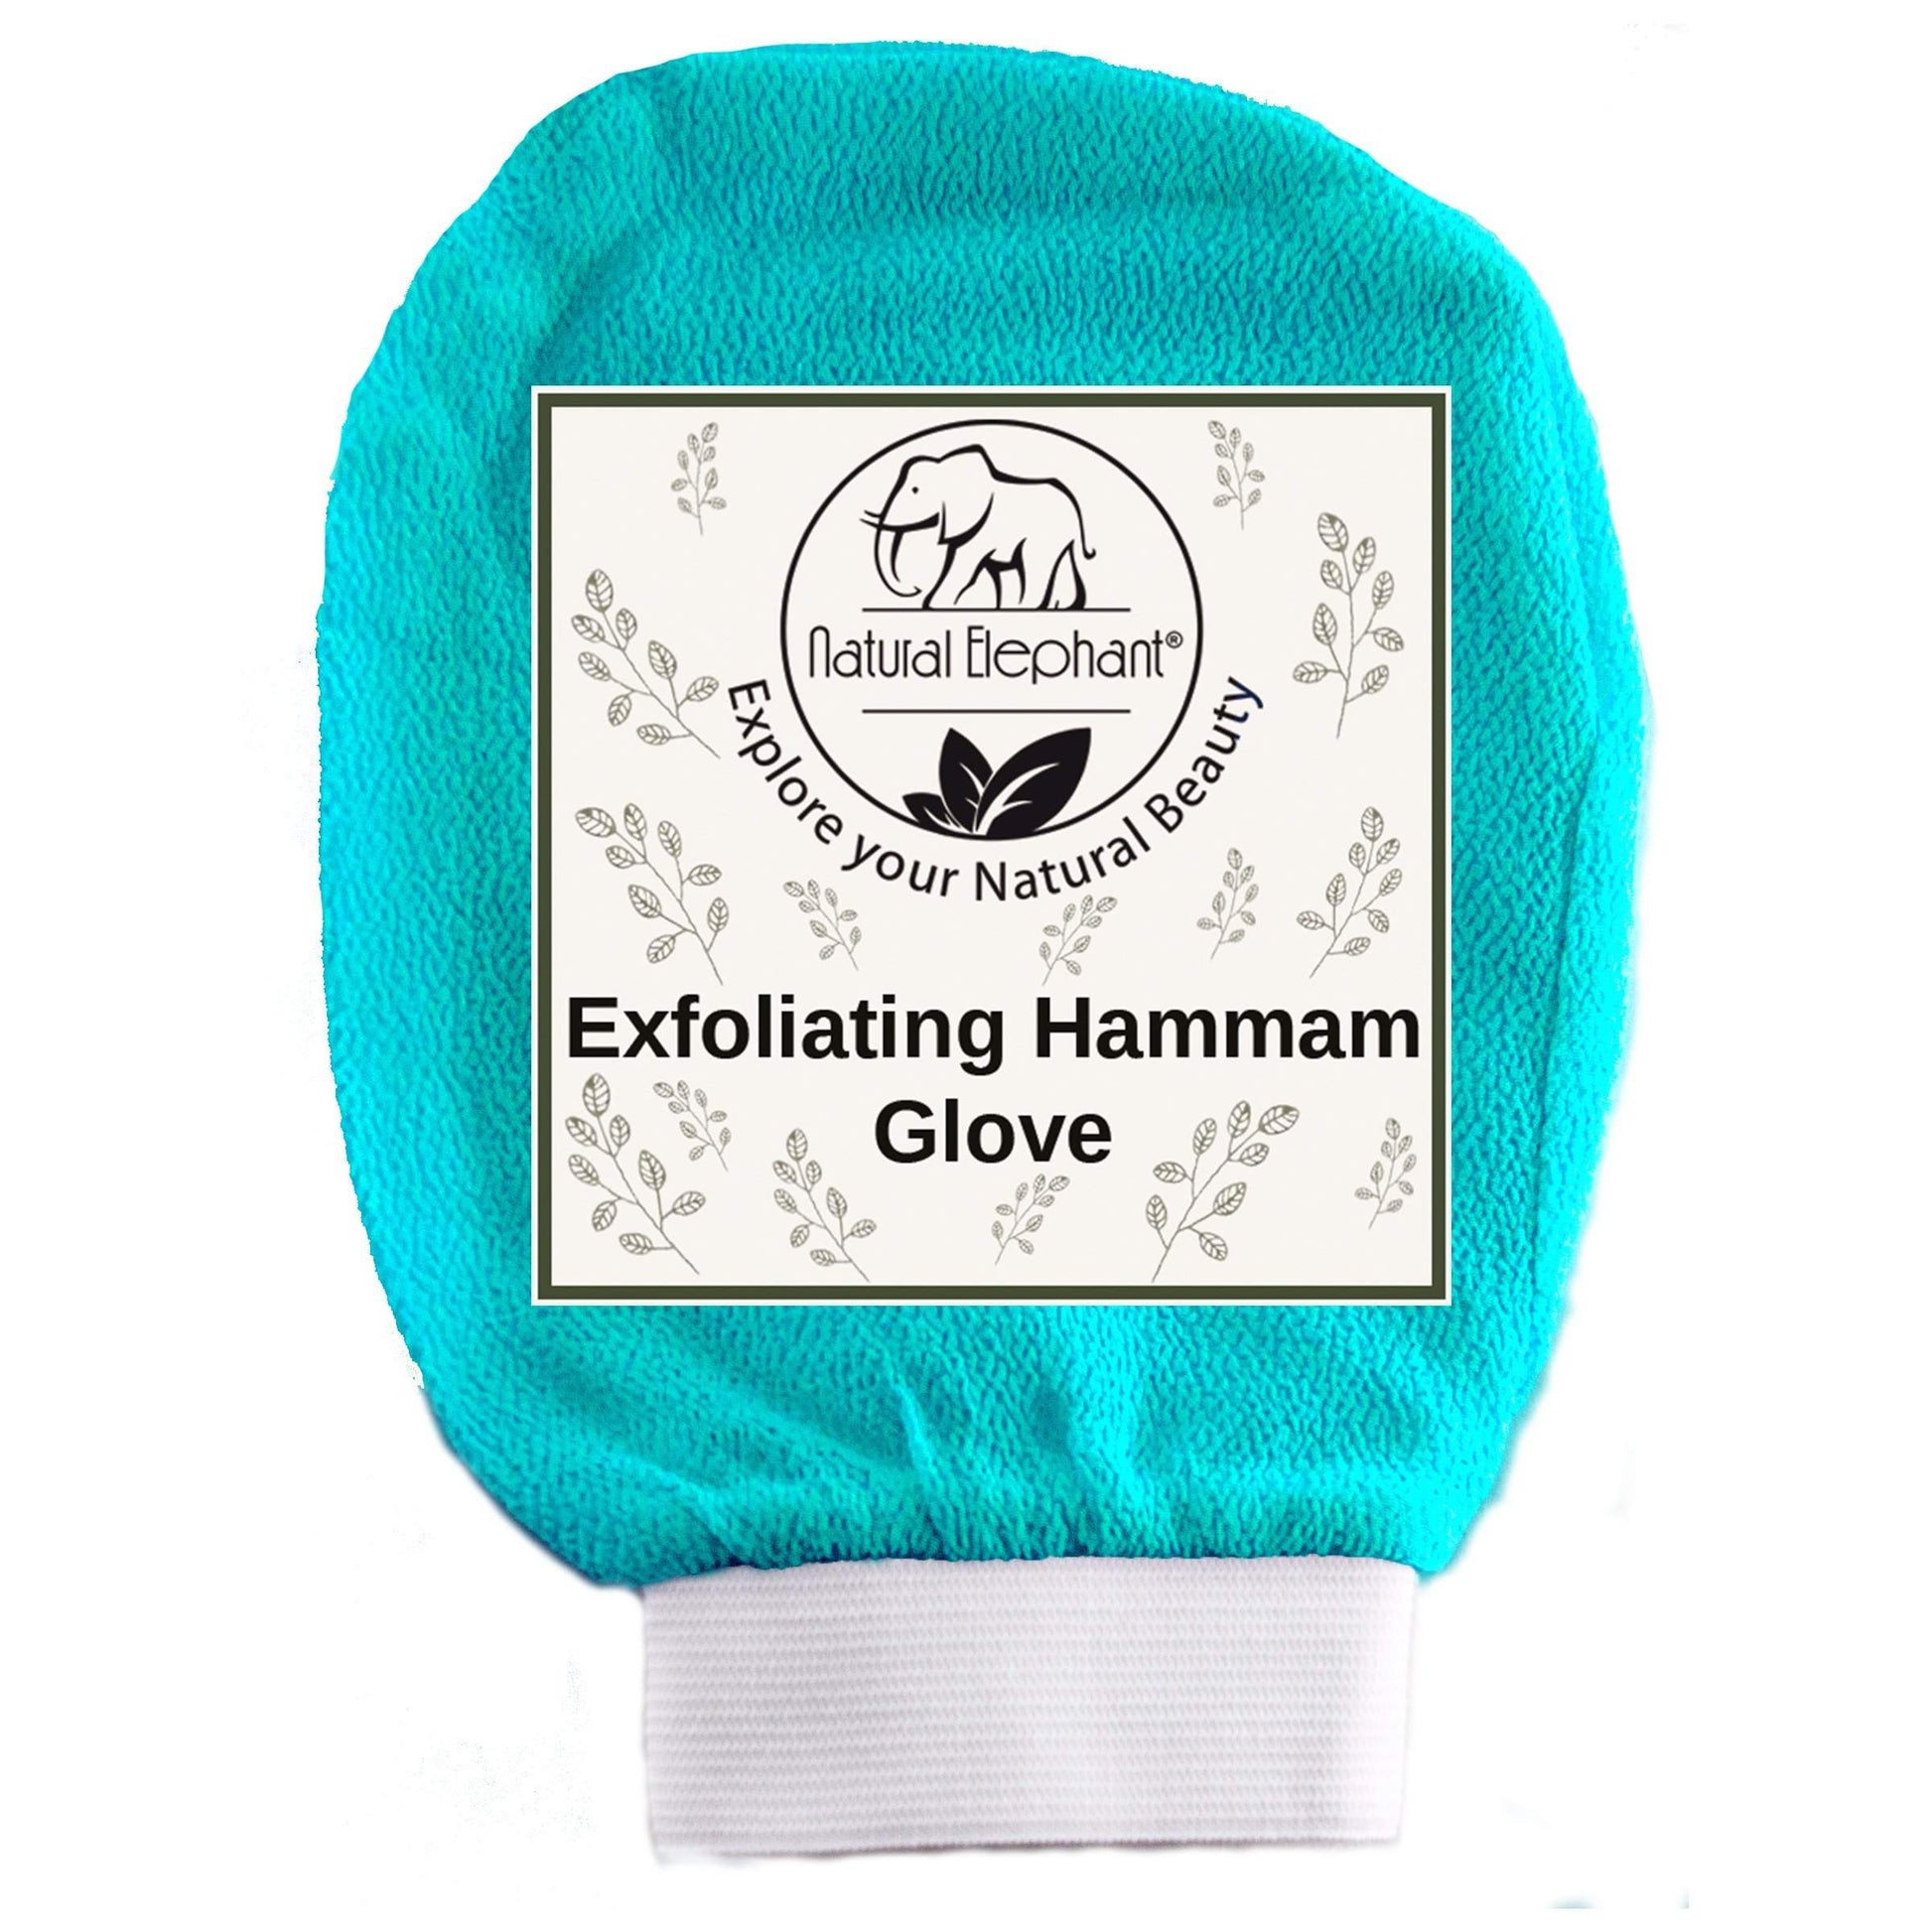 Natural Elephant Exfoliating Hammam Glove-Natural Elephant-BB_Bath and Shower,BB_Scrubs and Exfoliators,Brand_Natural Elephant,Collection_Bath and Body,Collection_Skincare,Concern_Acne & Blemishes,Concern_Combination Skin,Concern_Dry Skin,Concern_Dryness,Concern_Dullness,Concern_Large Pores,Concern_Oily Skin,Concern_Sensitive Skin,NATURAL_Morroccan Collection